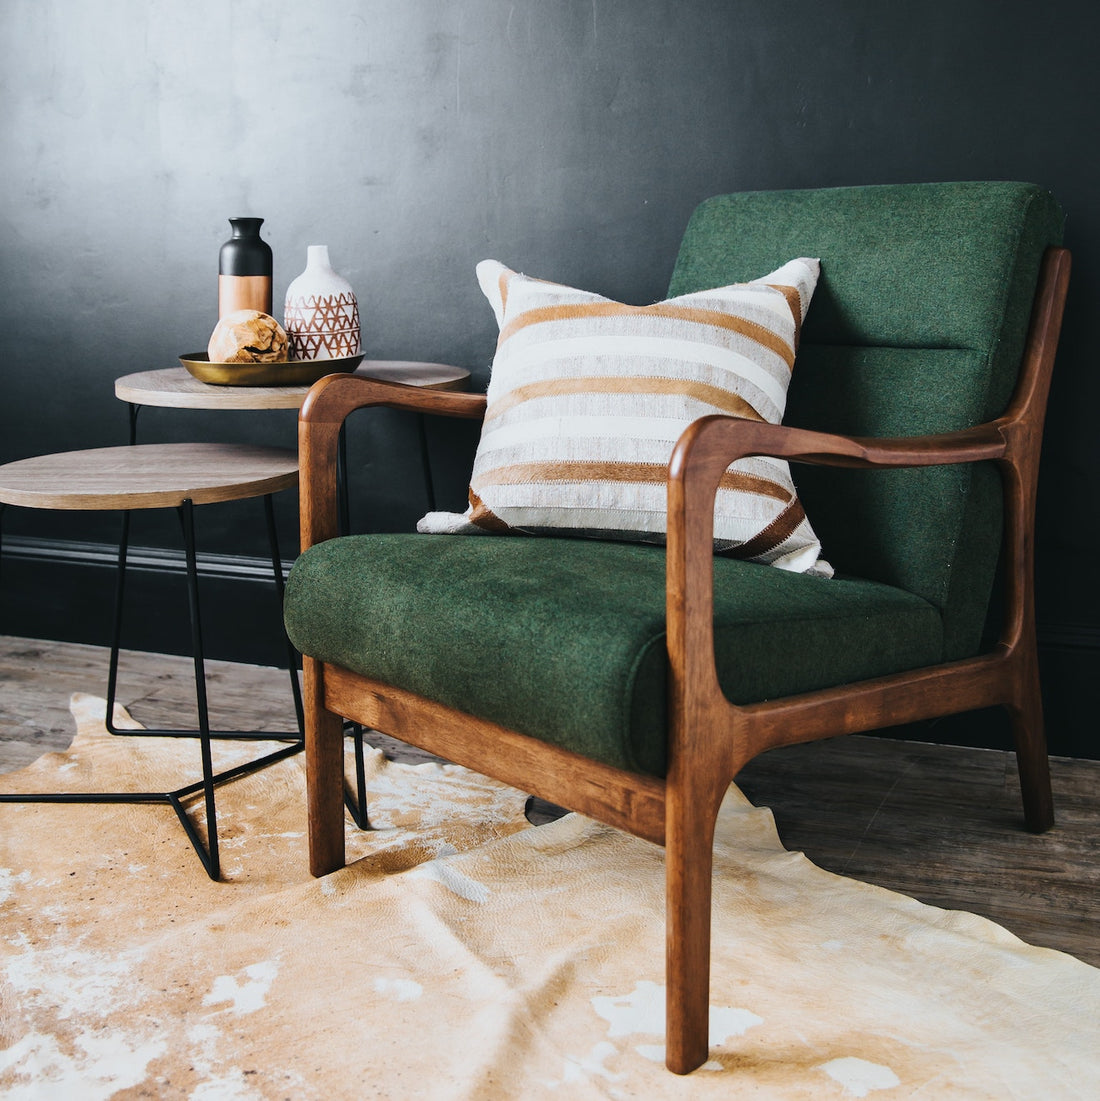 Why should you reupholster your old furniture?